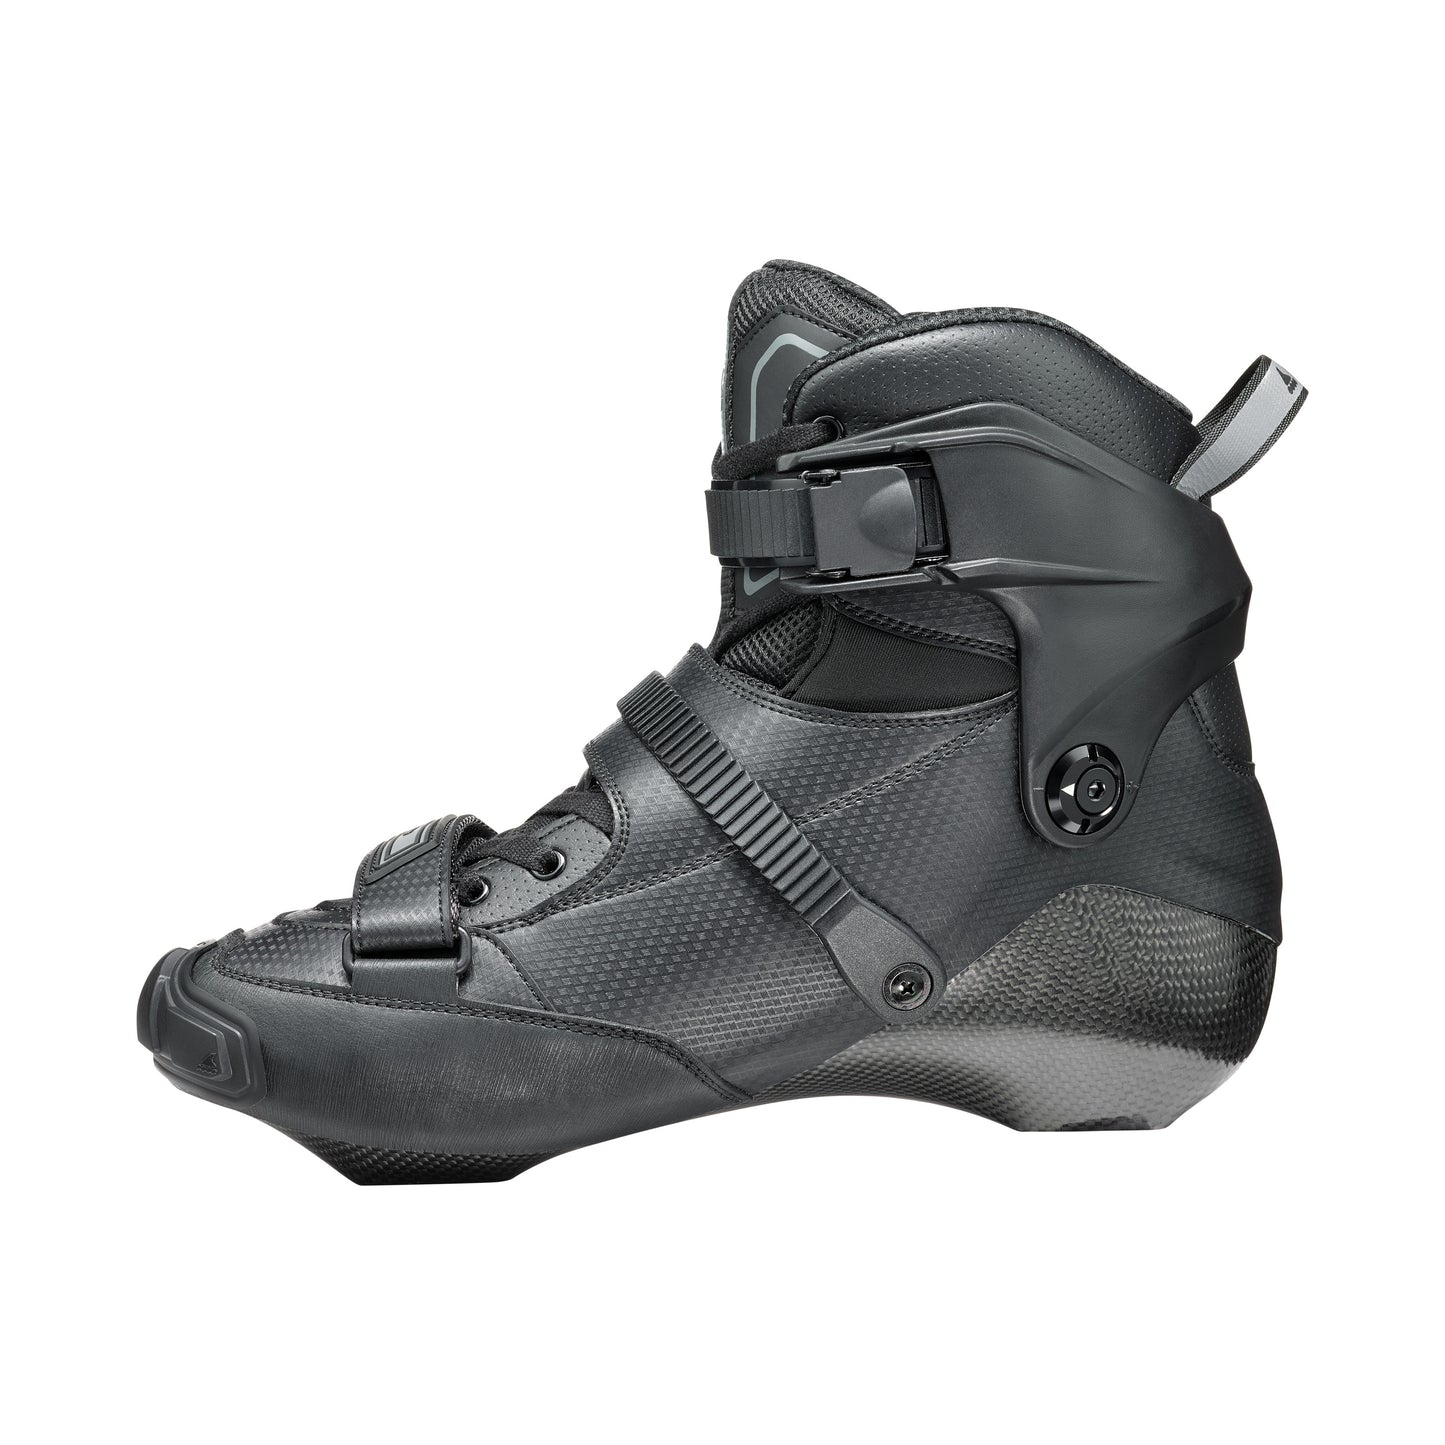 Rollerblade Crossfire Boot